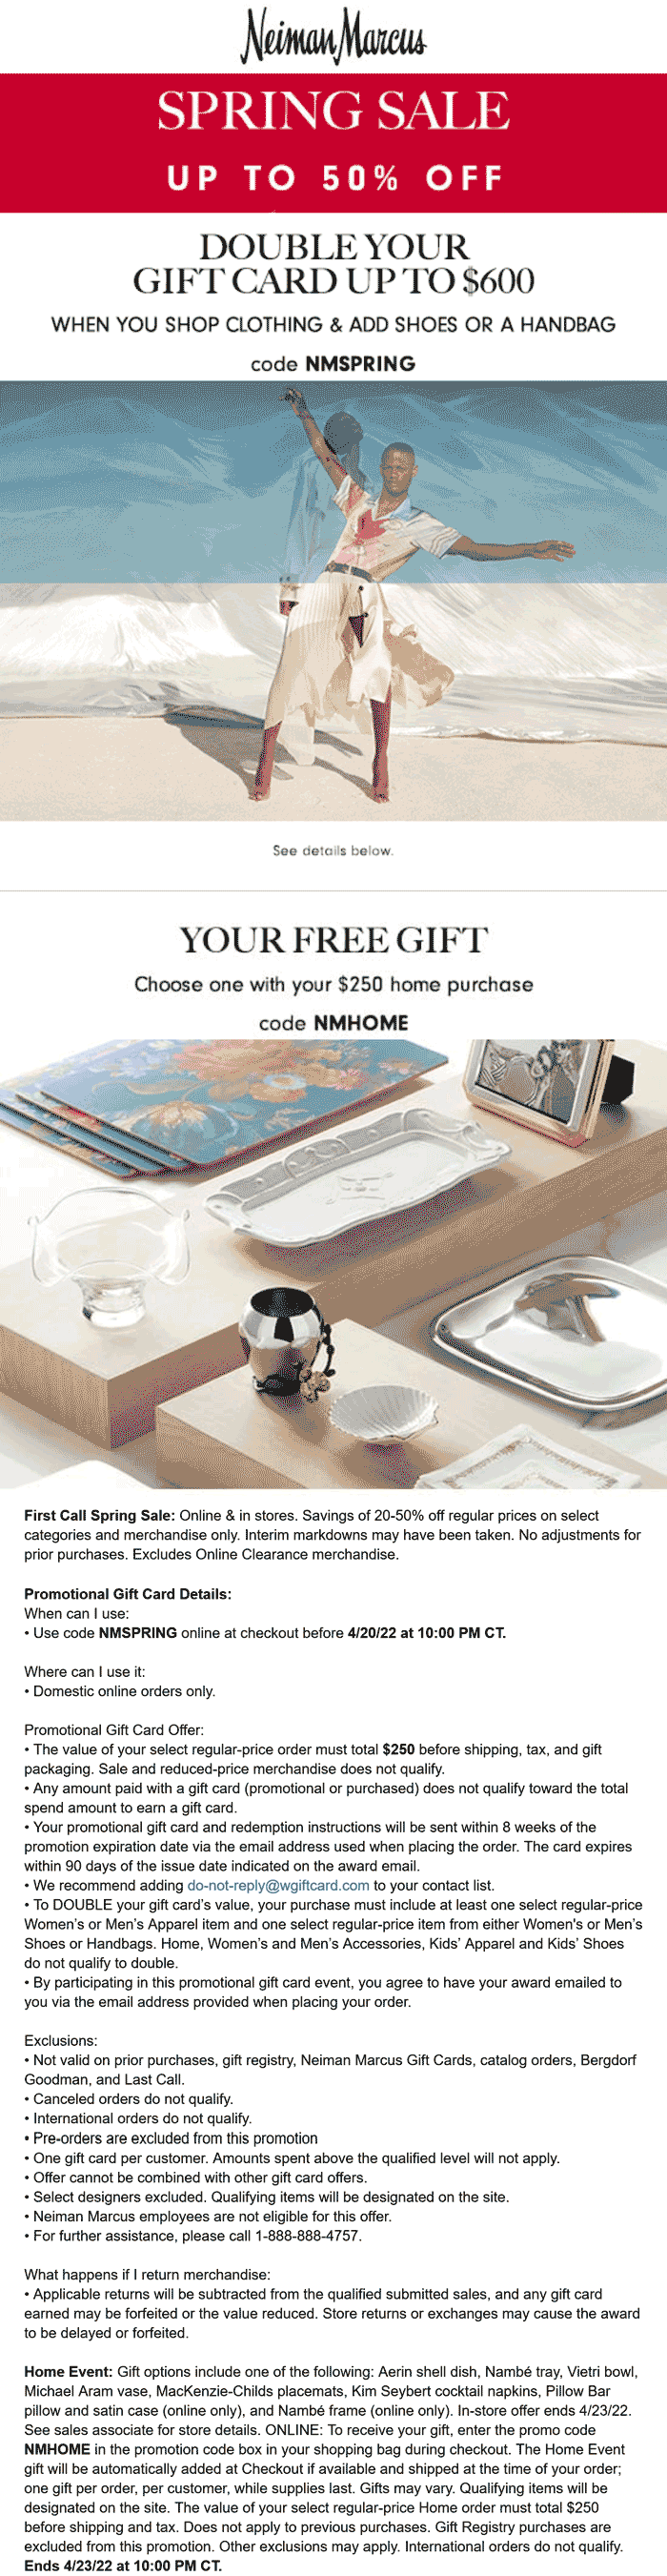 Neiman Marcus stores Coupon  Free gift on $250 home & more at Neiman Marcus, or online via promo code NMHOME #neimanmarcus 